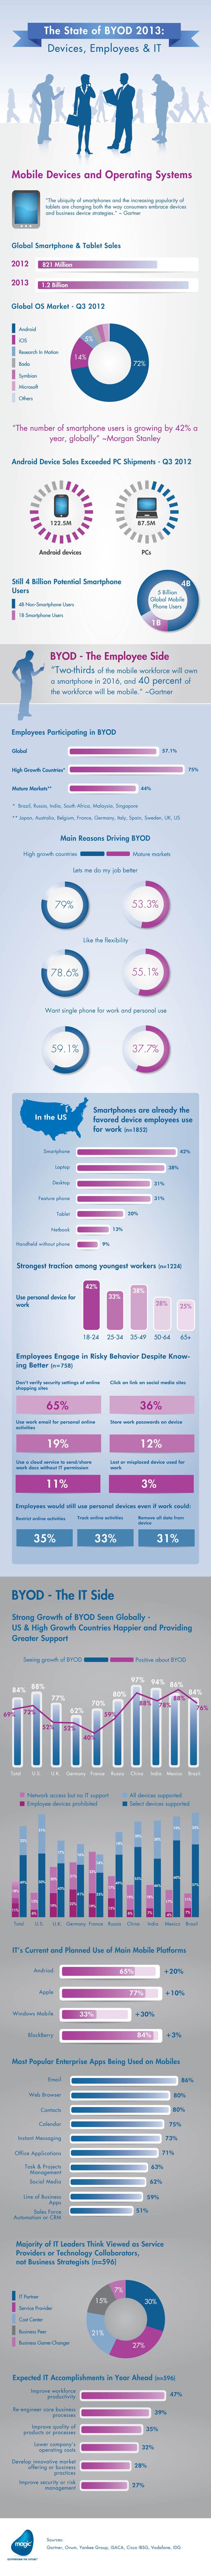 BYOD 2013 Infographic